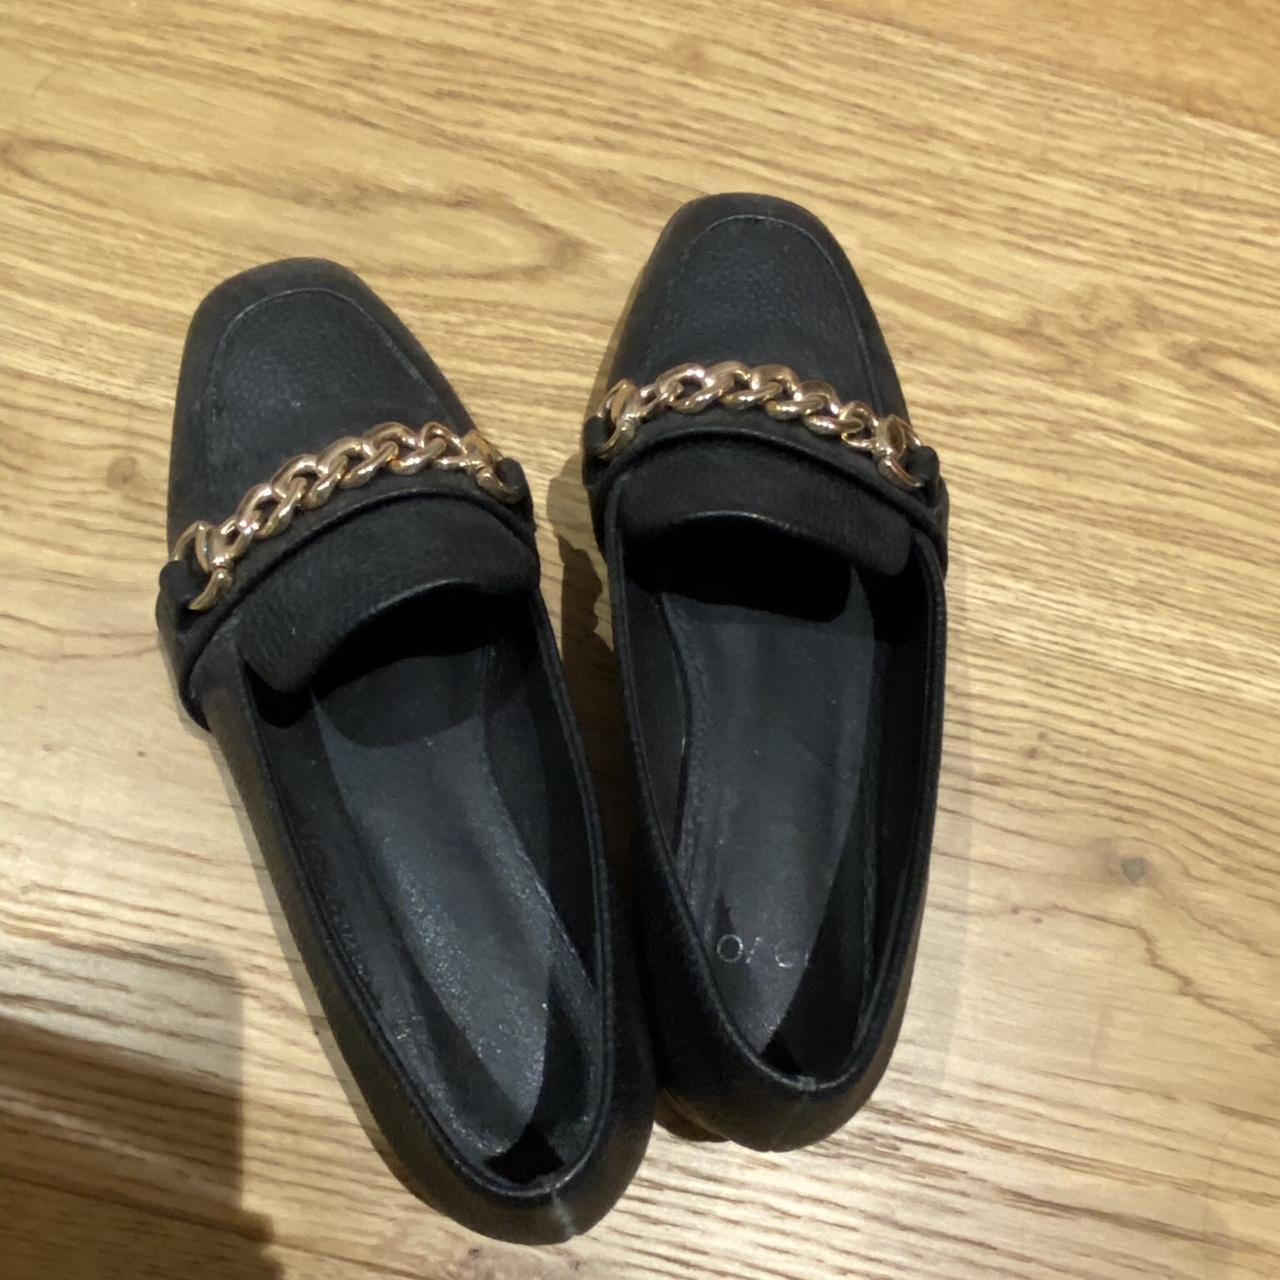 Novo loafers size 5 (au) collecting dust in my... - Depop